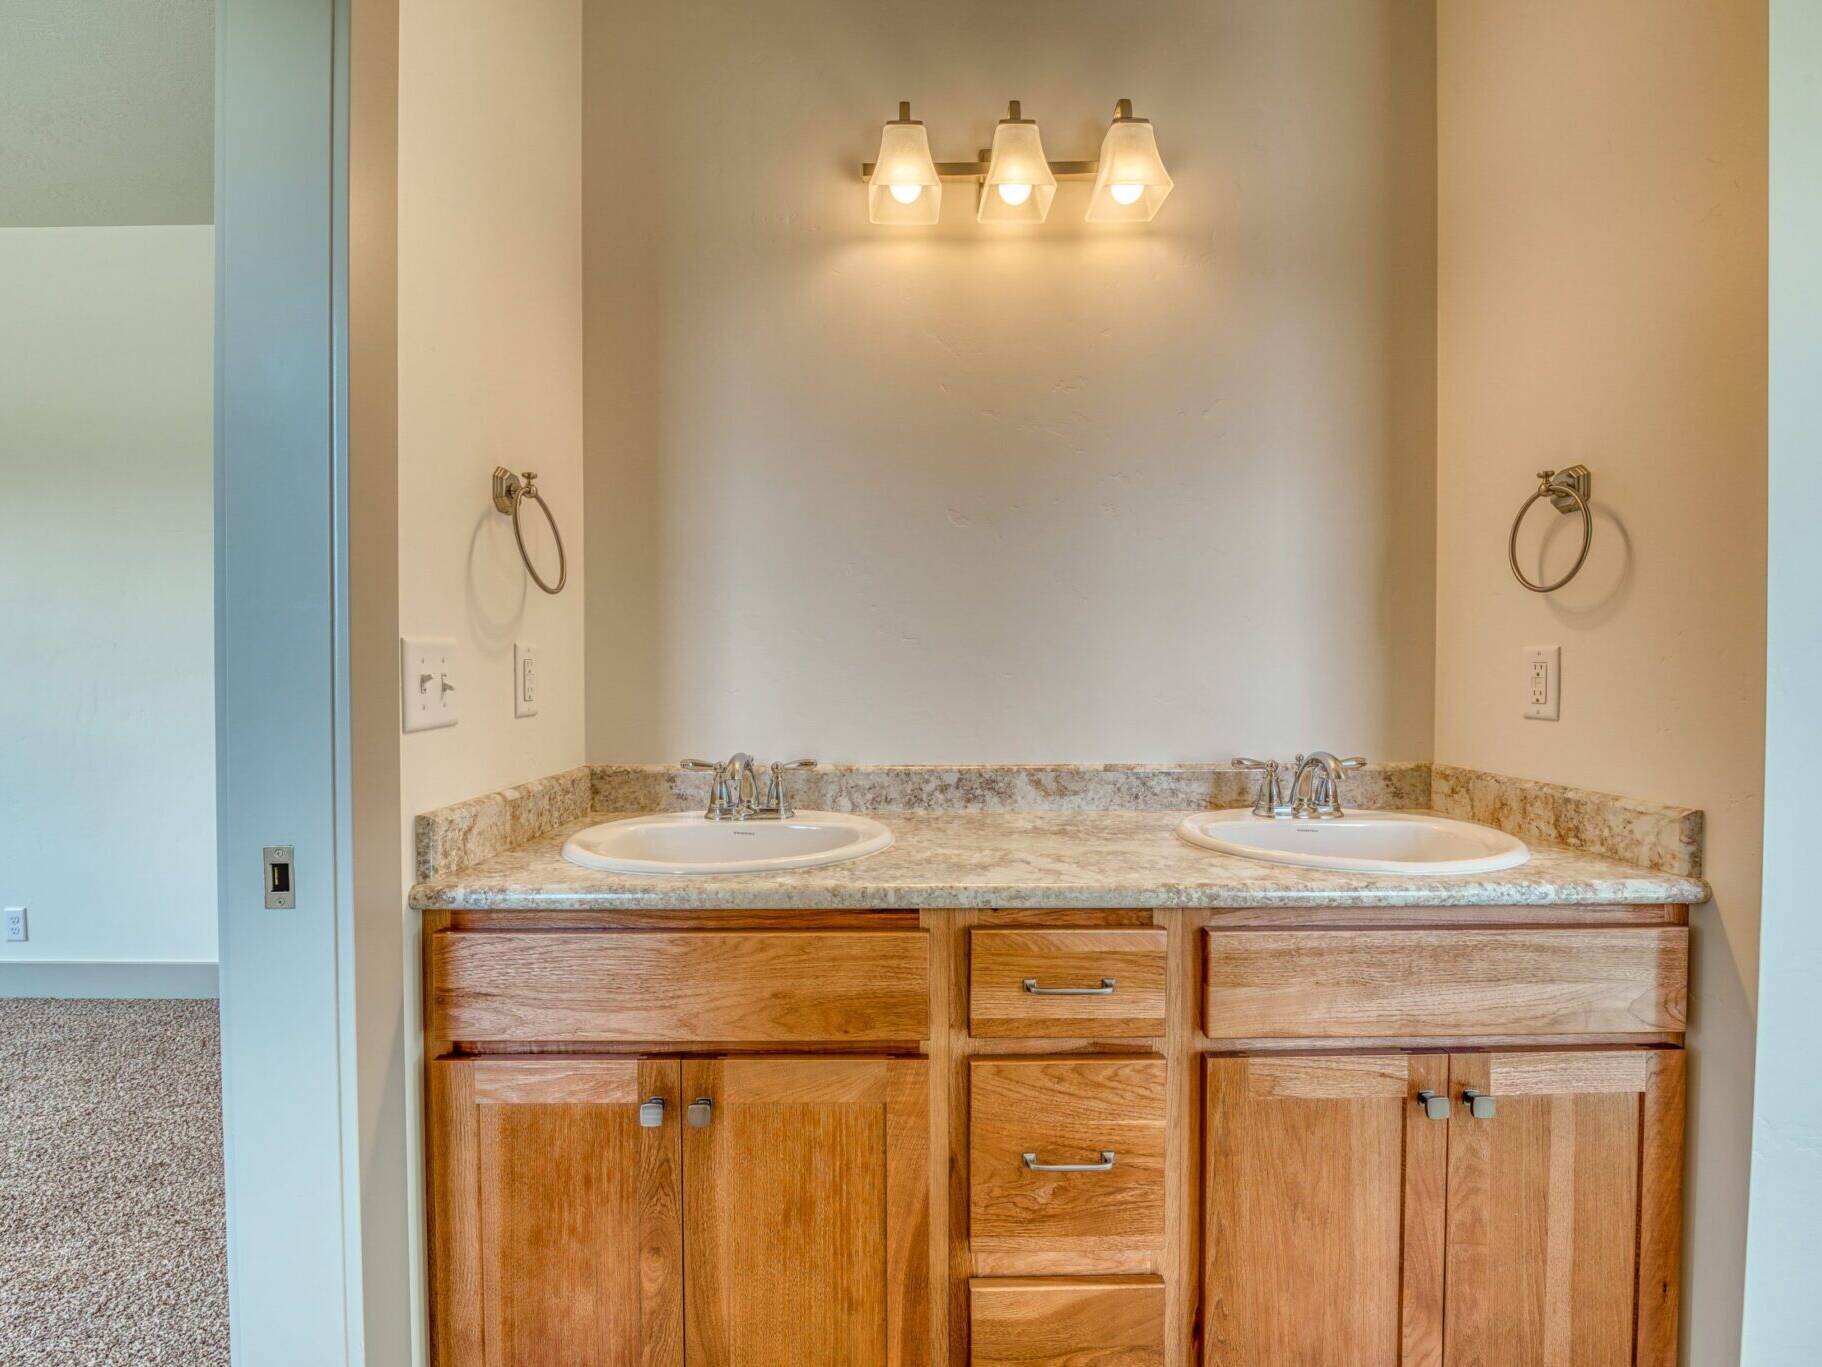 Master Bathroom in the Country Cottage model home - built by Big Sky Builders in Hamilton, MT